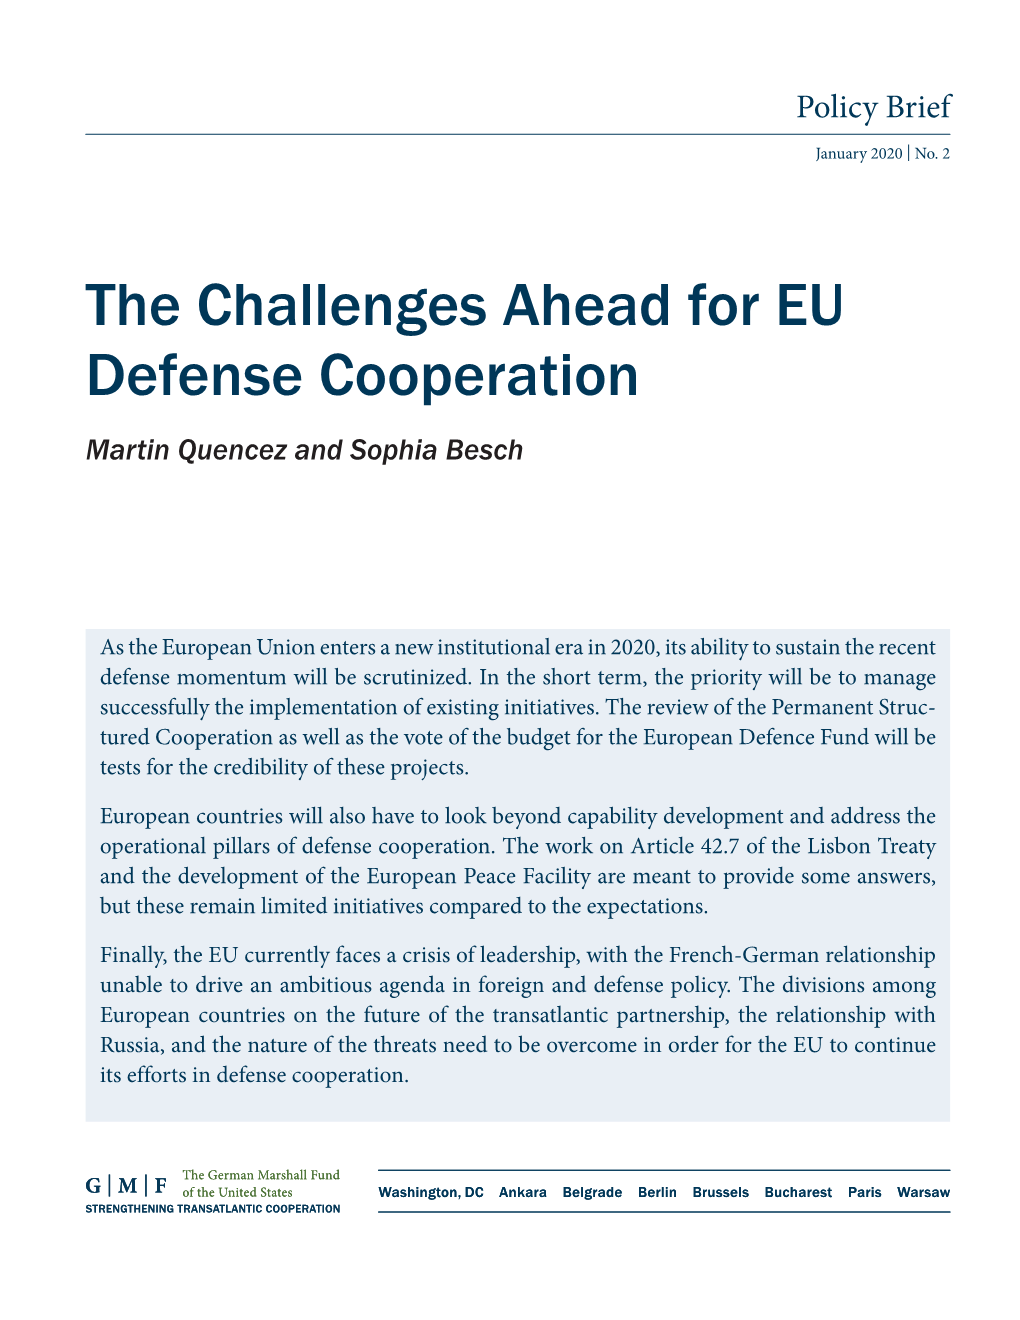 The Challenges Ahead for EU Defense Cooperation Martin Quencez and Sophia Besch